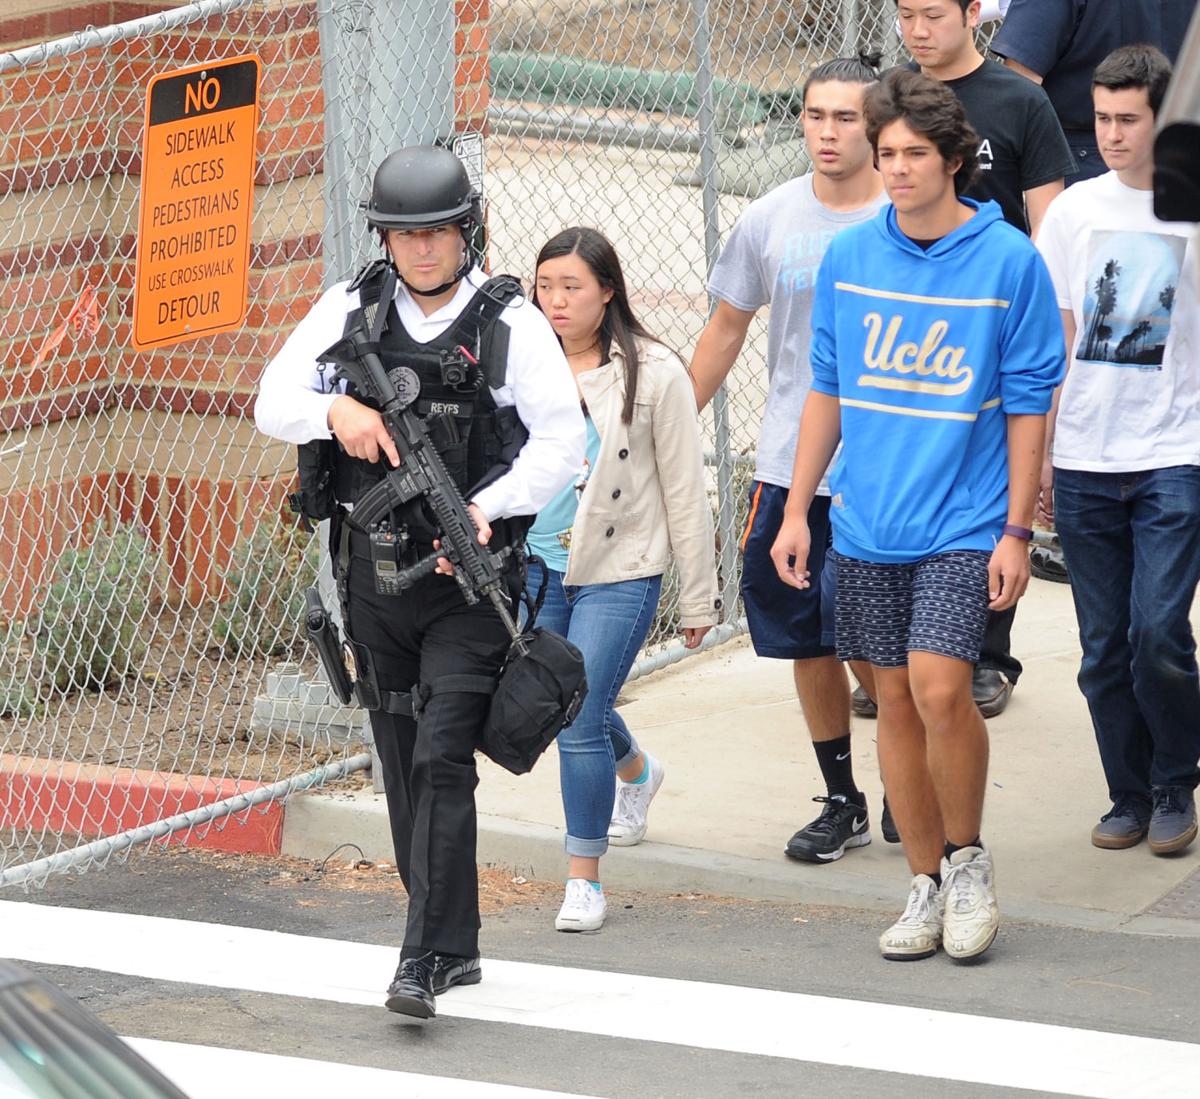 Photos: Two dead in UCLA shooting | National News | theworldlink.com